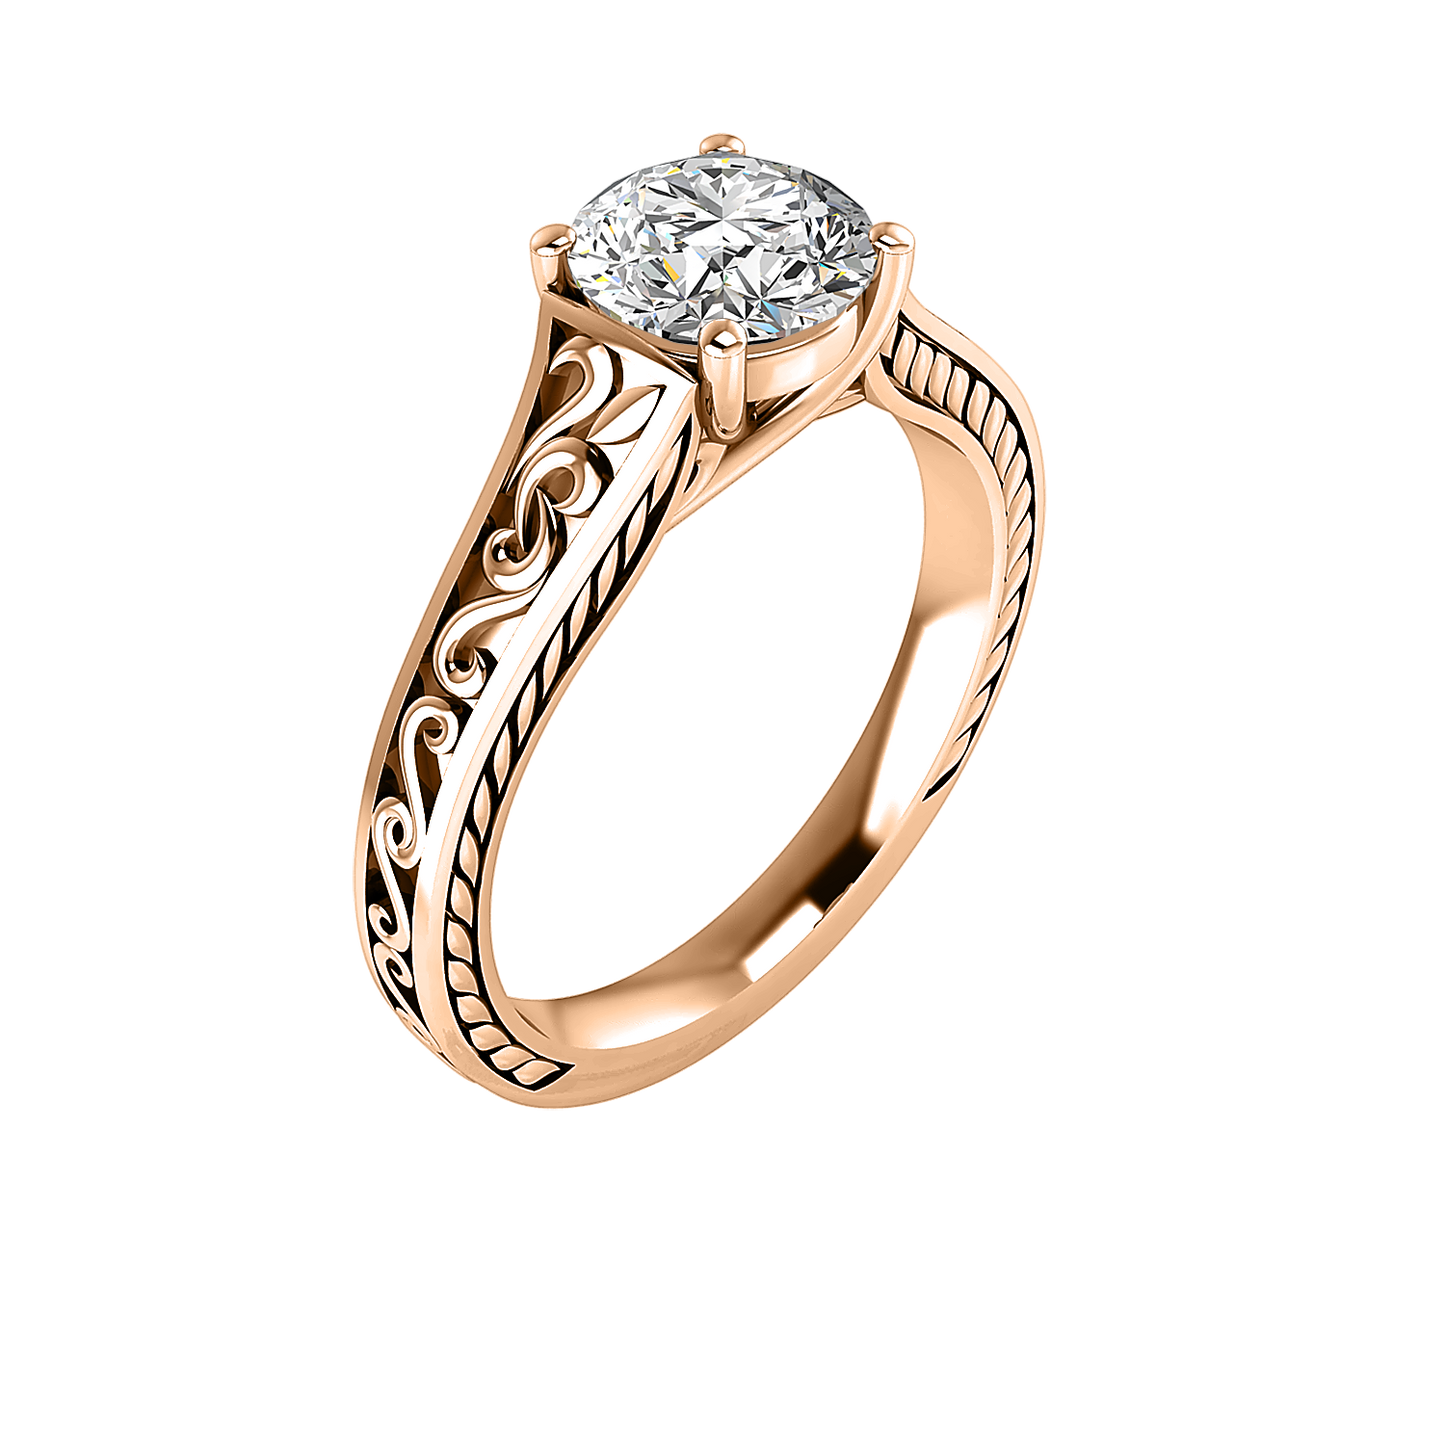 Emma 4 Prong Solitaire Engagement Ring - The Diamond Club